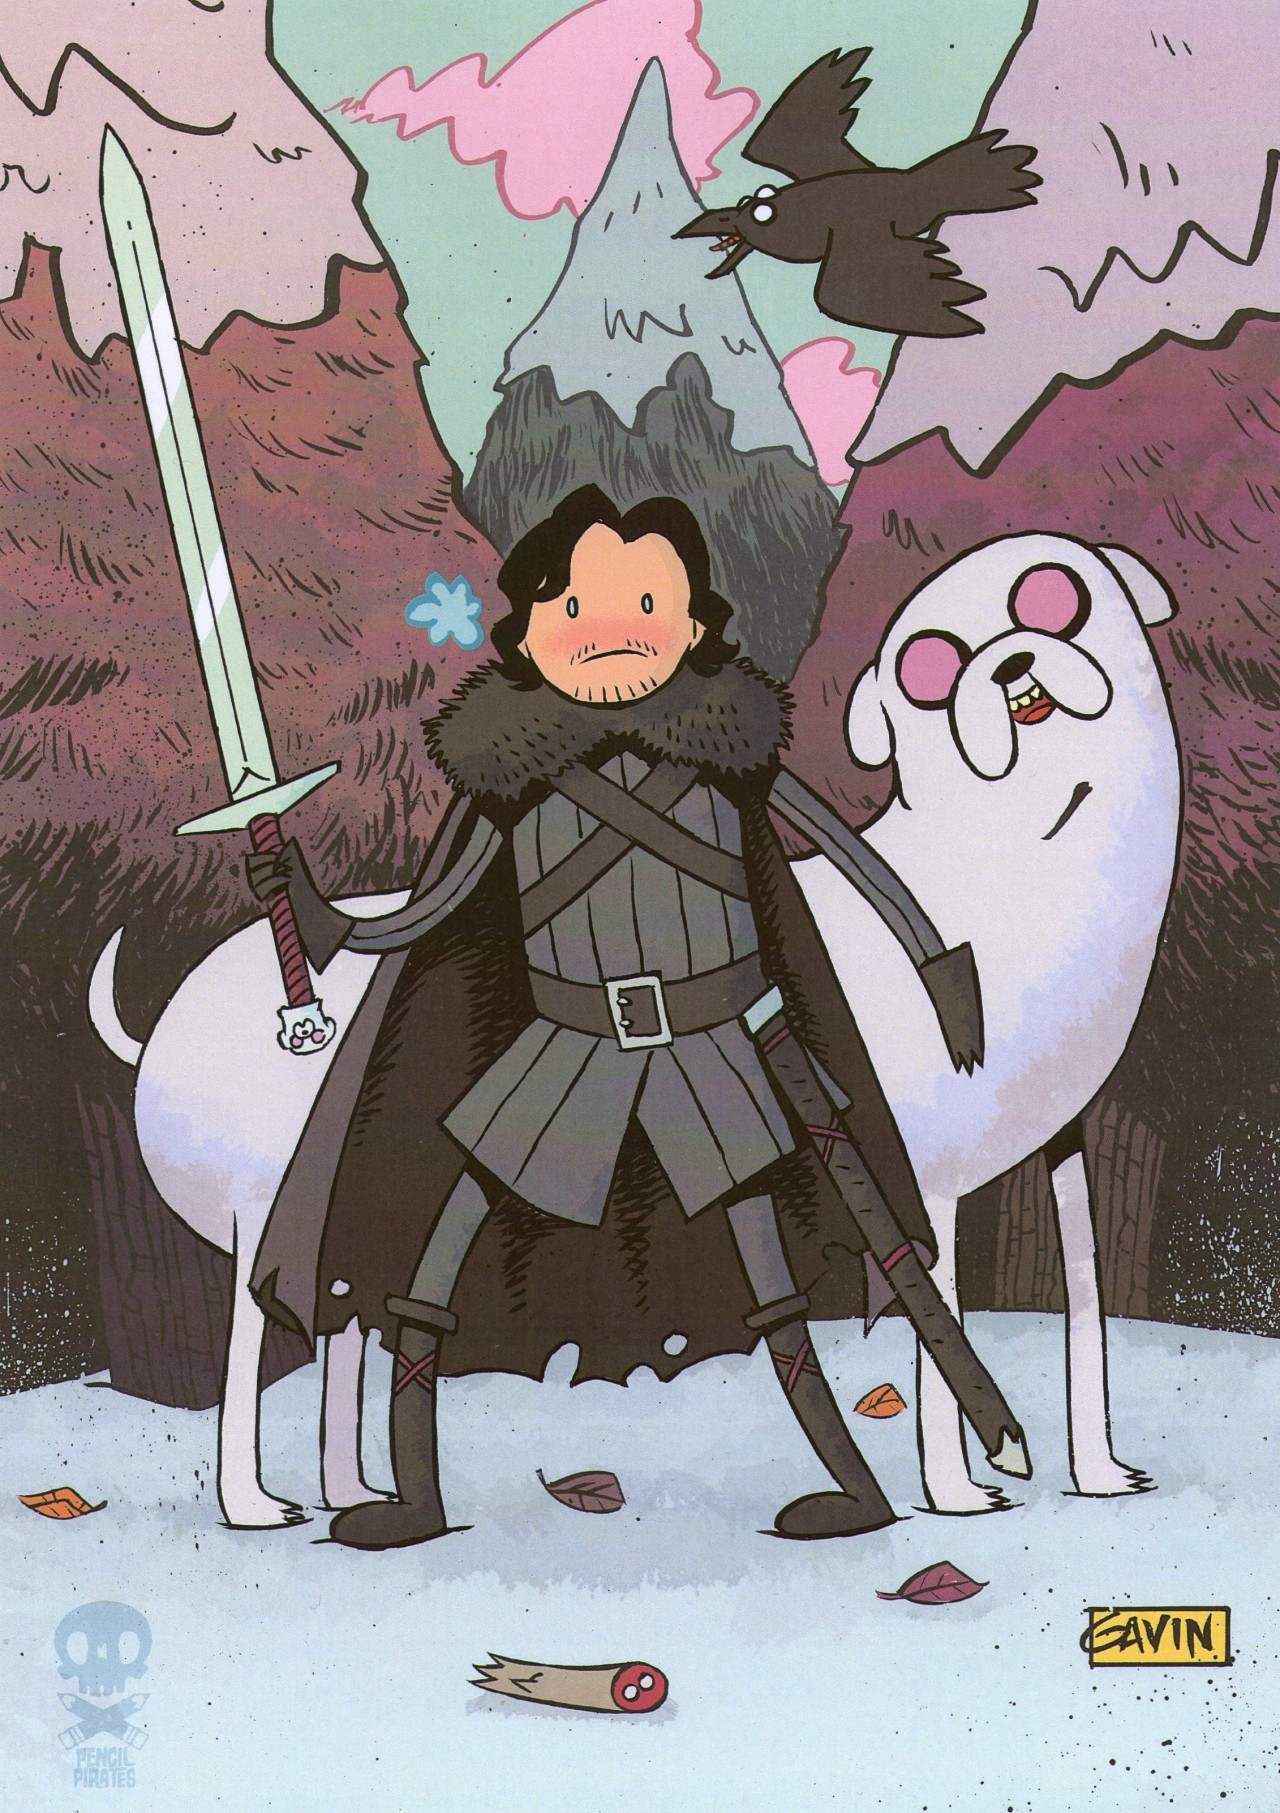 Awesome Game of Thrones / Adventure Time Artwork of Jon Snow and Ghost by TheNewsAtBen